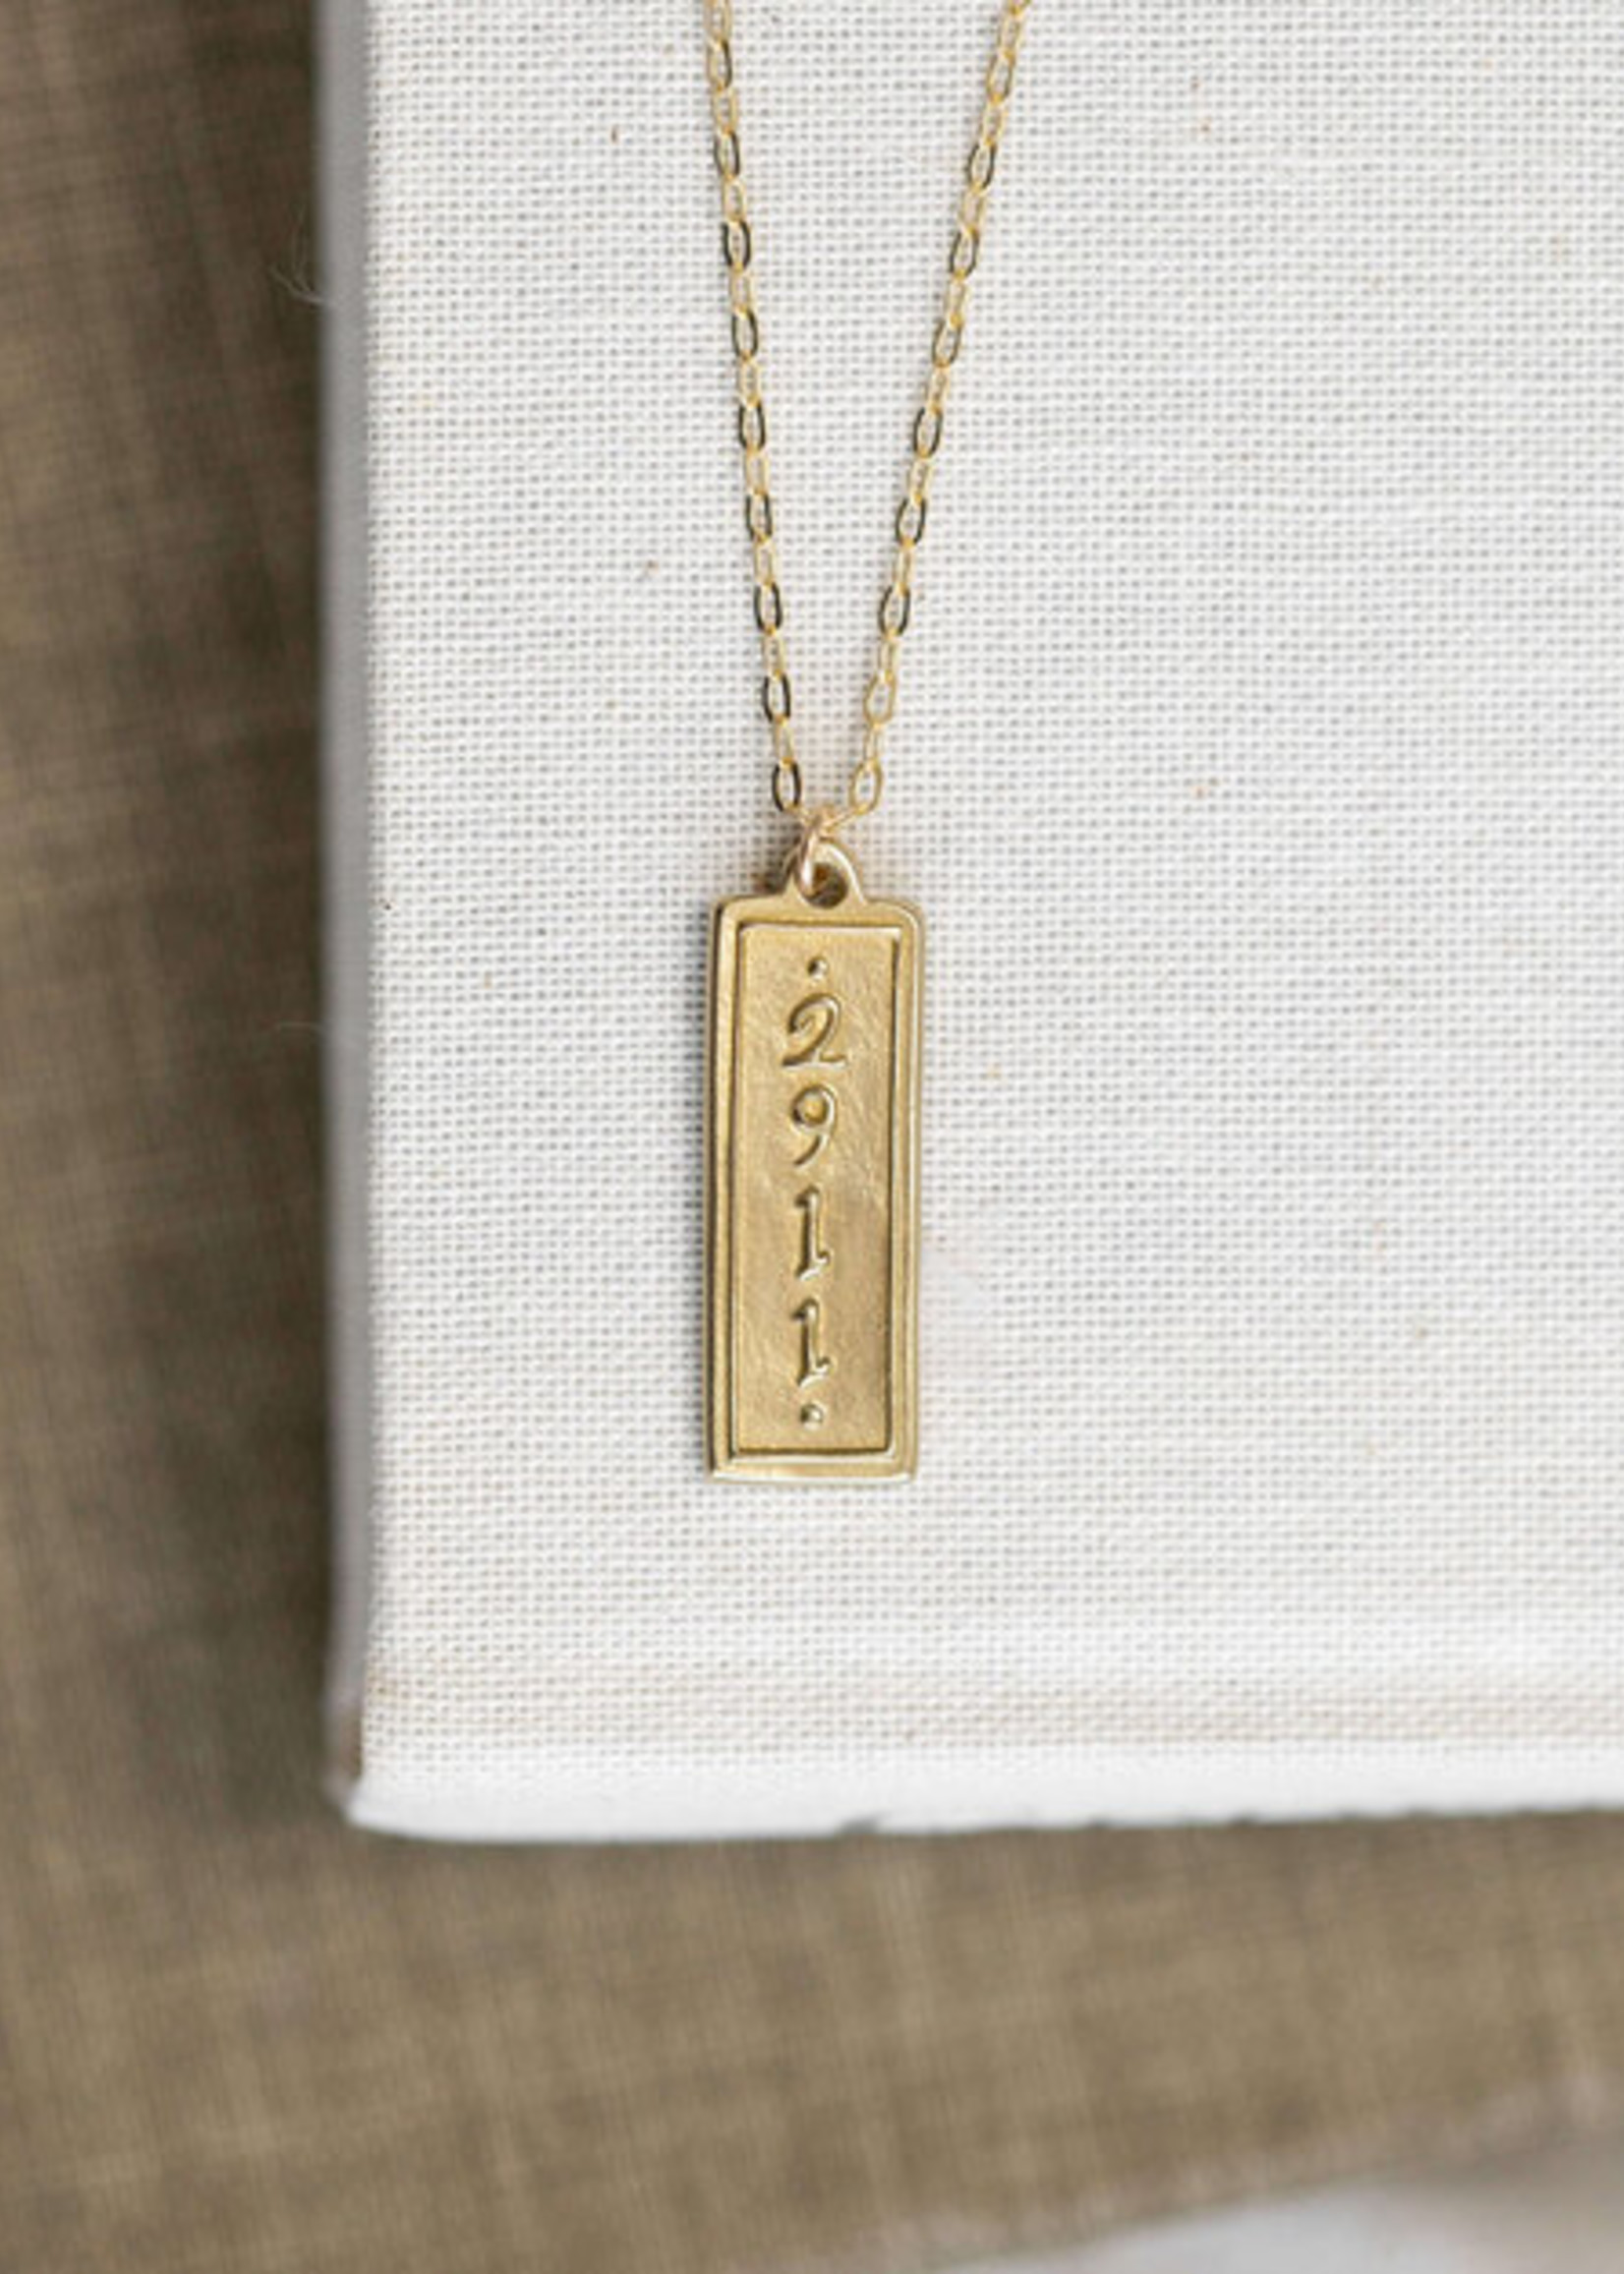 Scripture Inspired Pendant Necklace JEREMIAH 29:11 32"